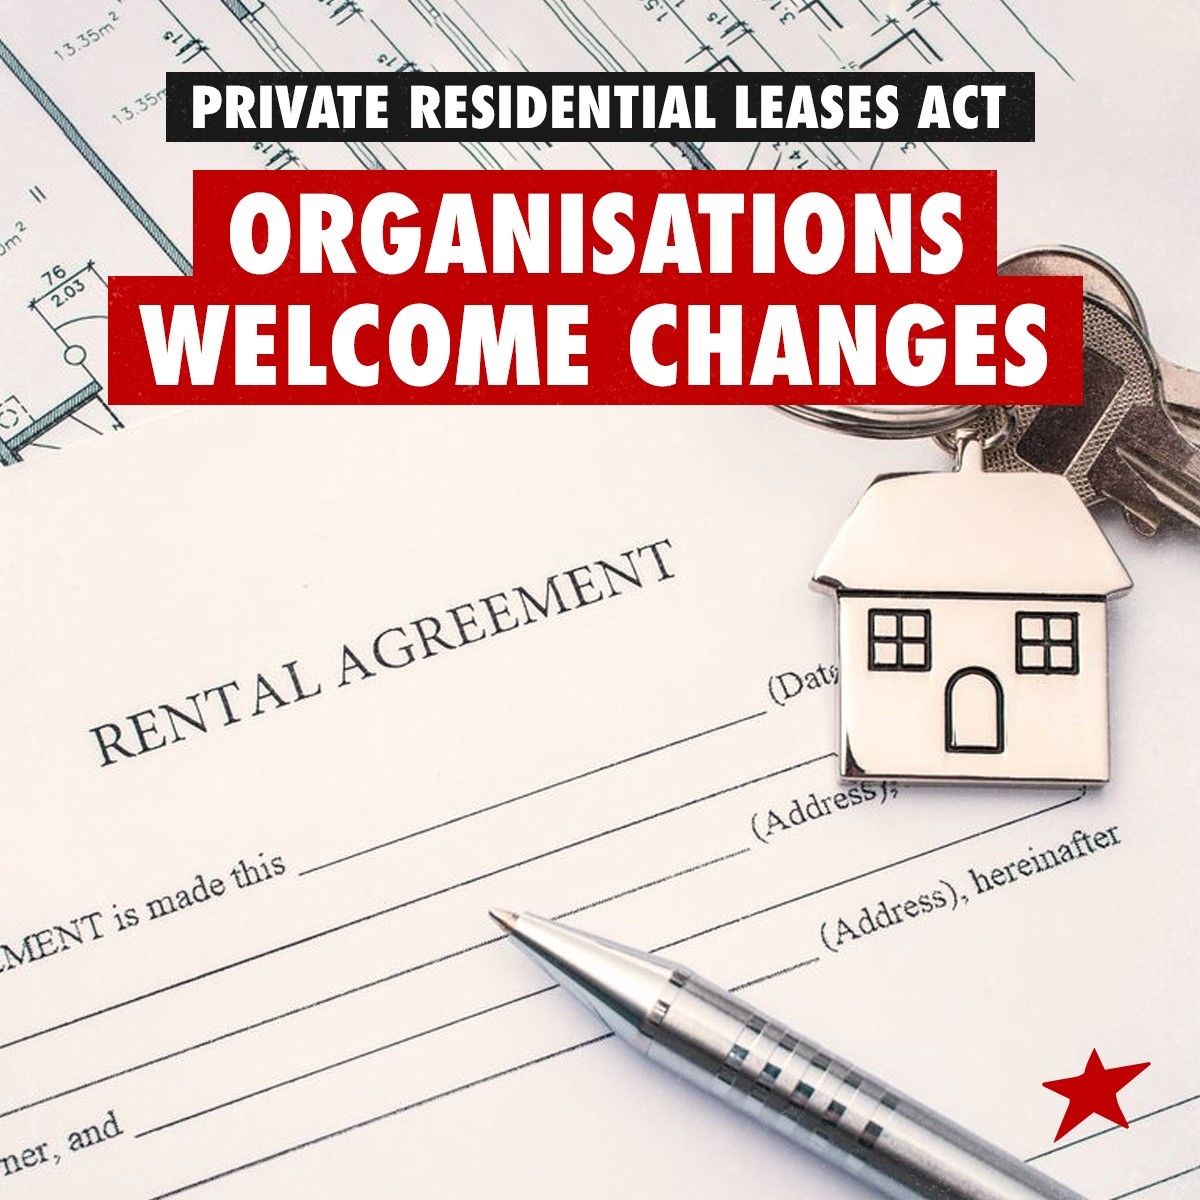 Organisations welcome changes to the Bill amending the Private Residential Leases Act